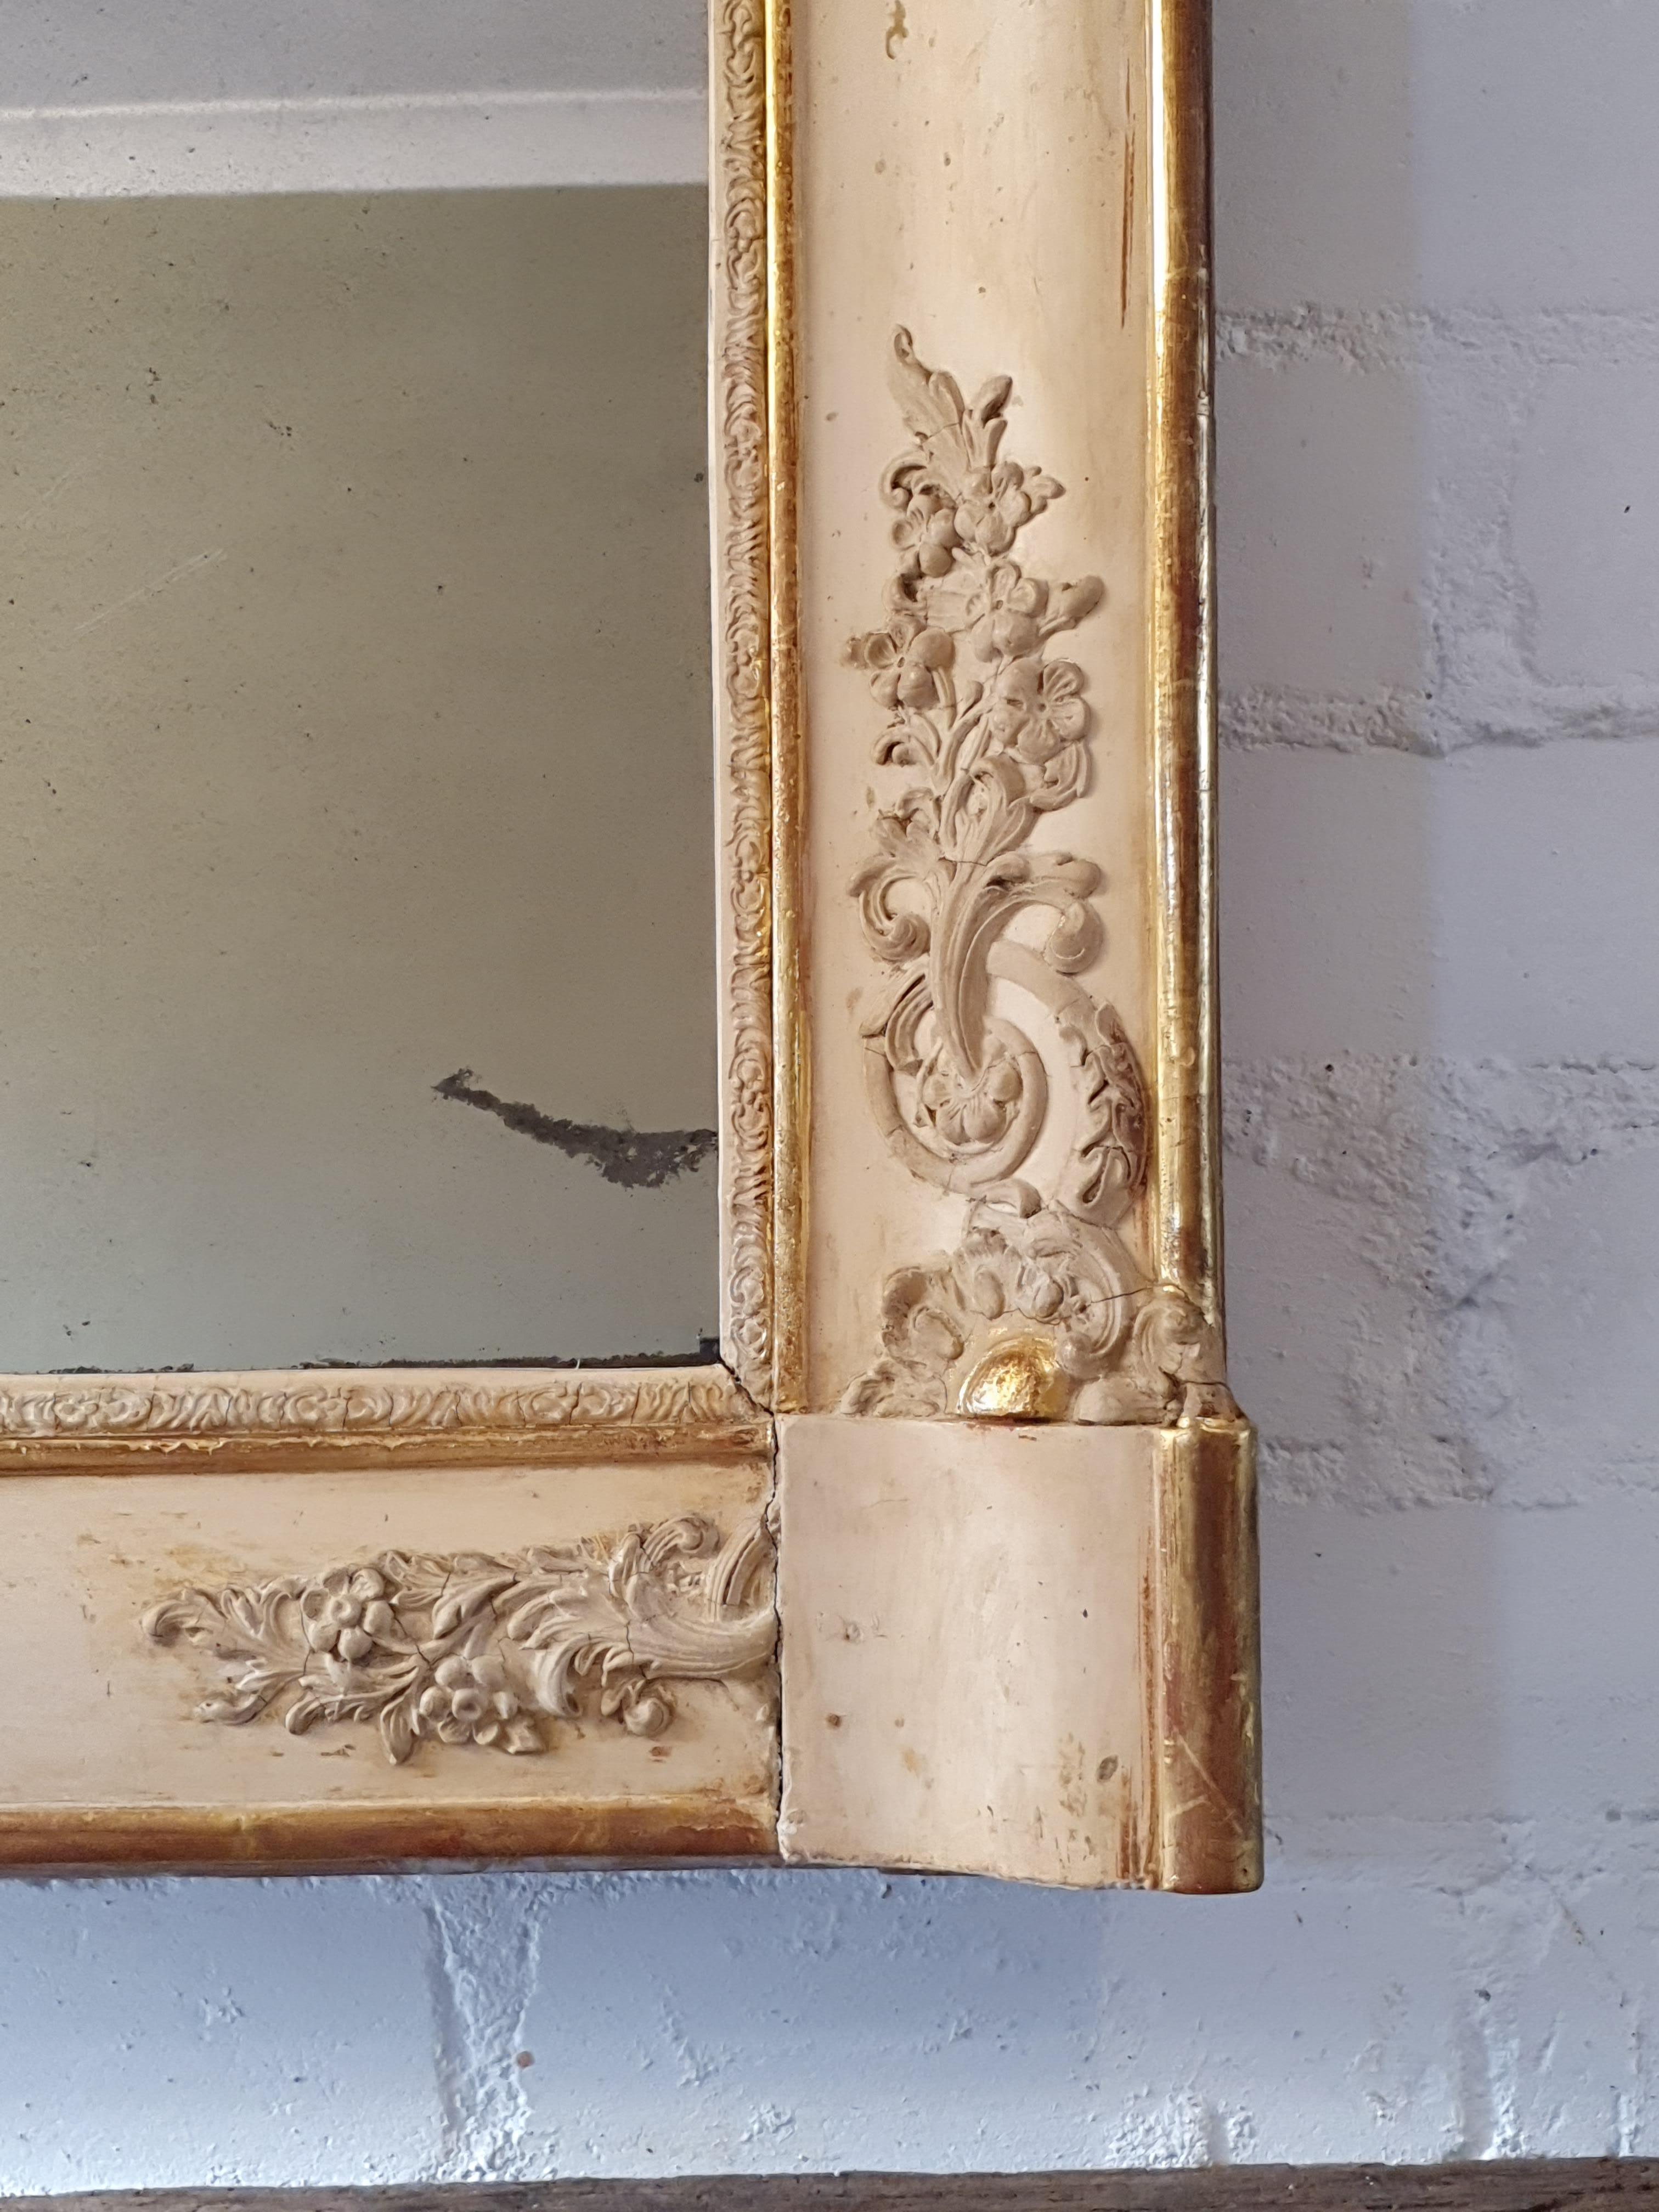 Early 19th century rectangular French wall / mantel mirror. Distressed finish, some of original gilding remains, contains original mercury glass witch sings of age (black spots, scratches etc). Very decorative with floral ornament.